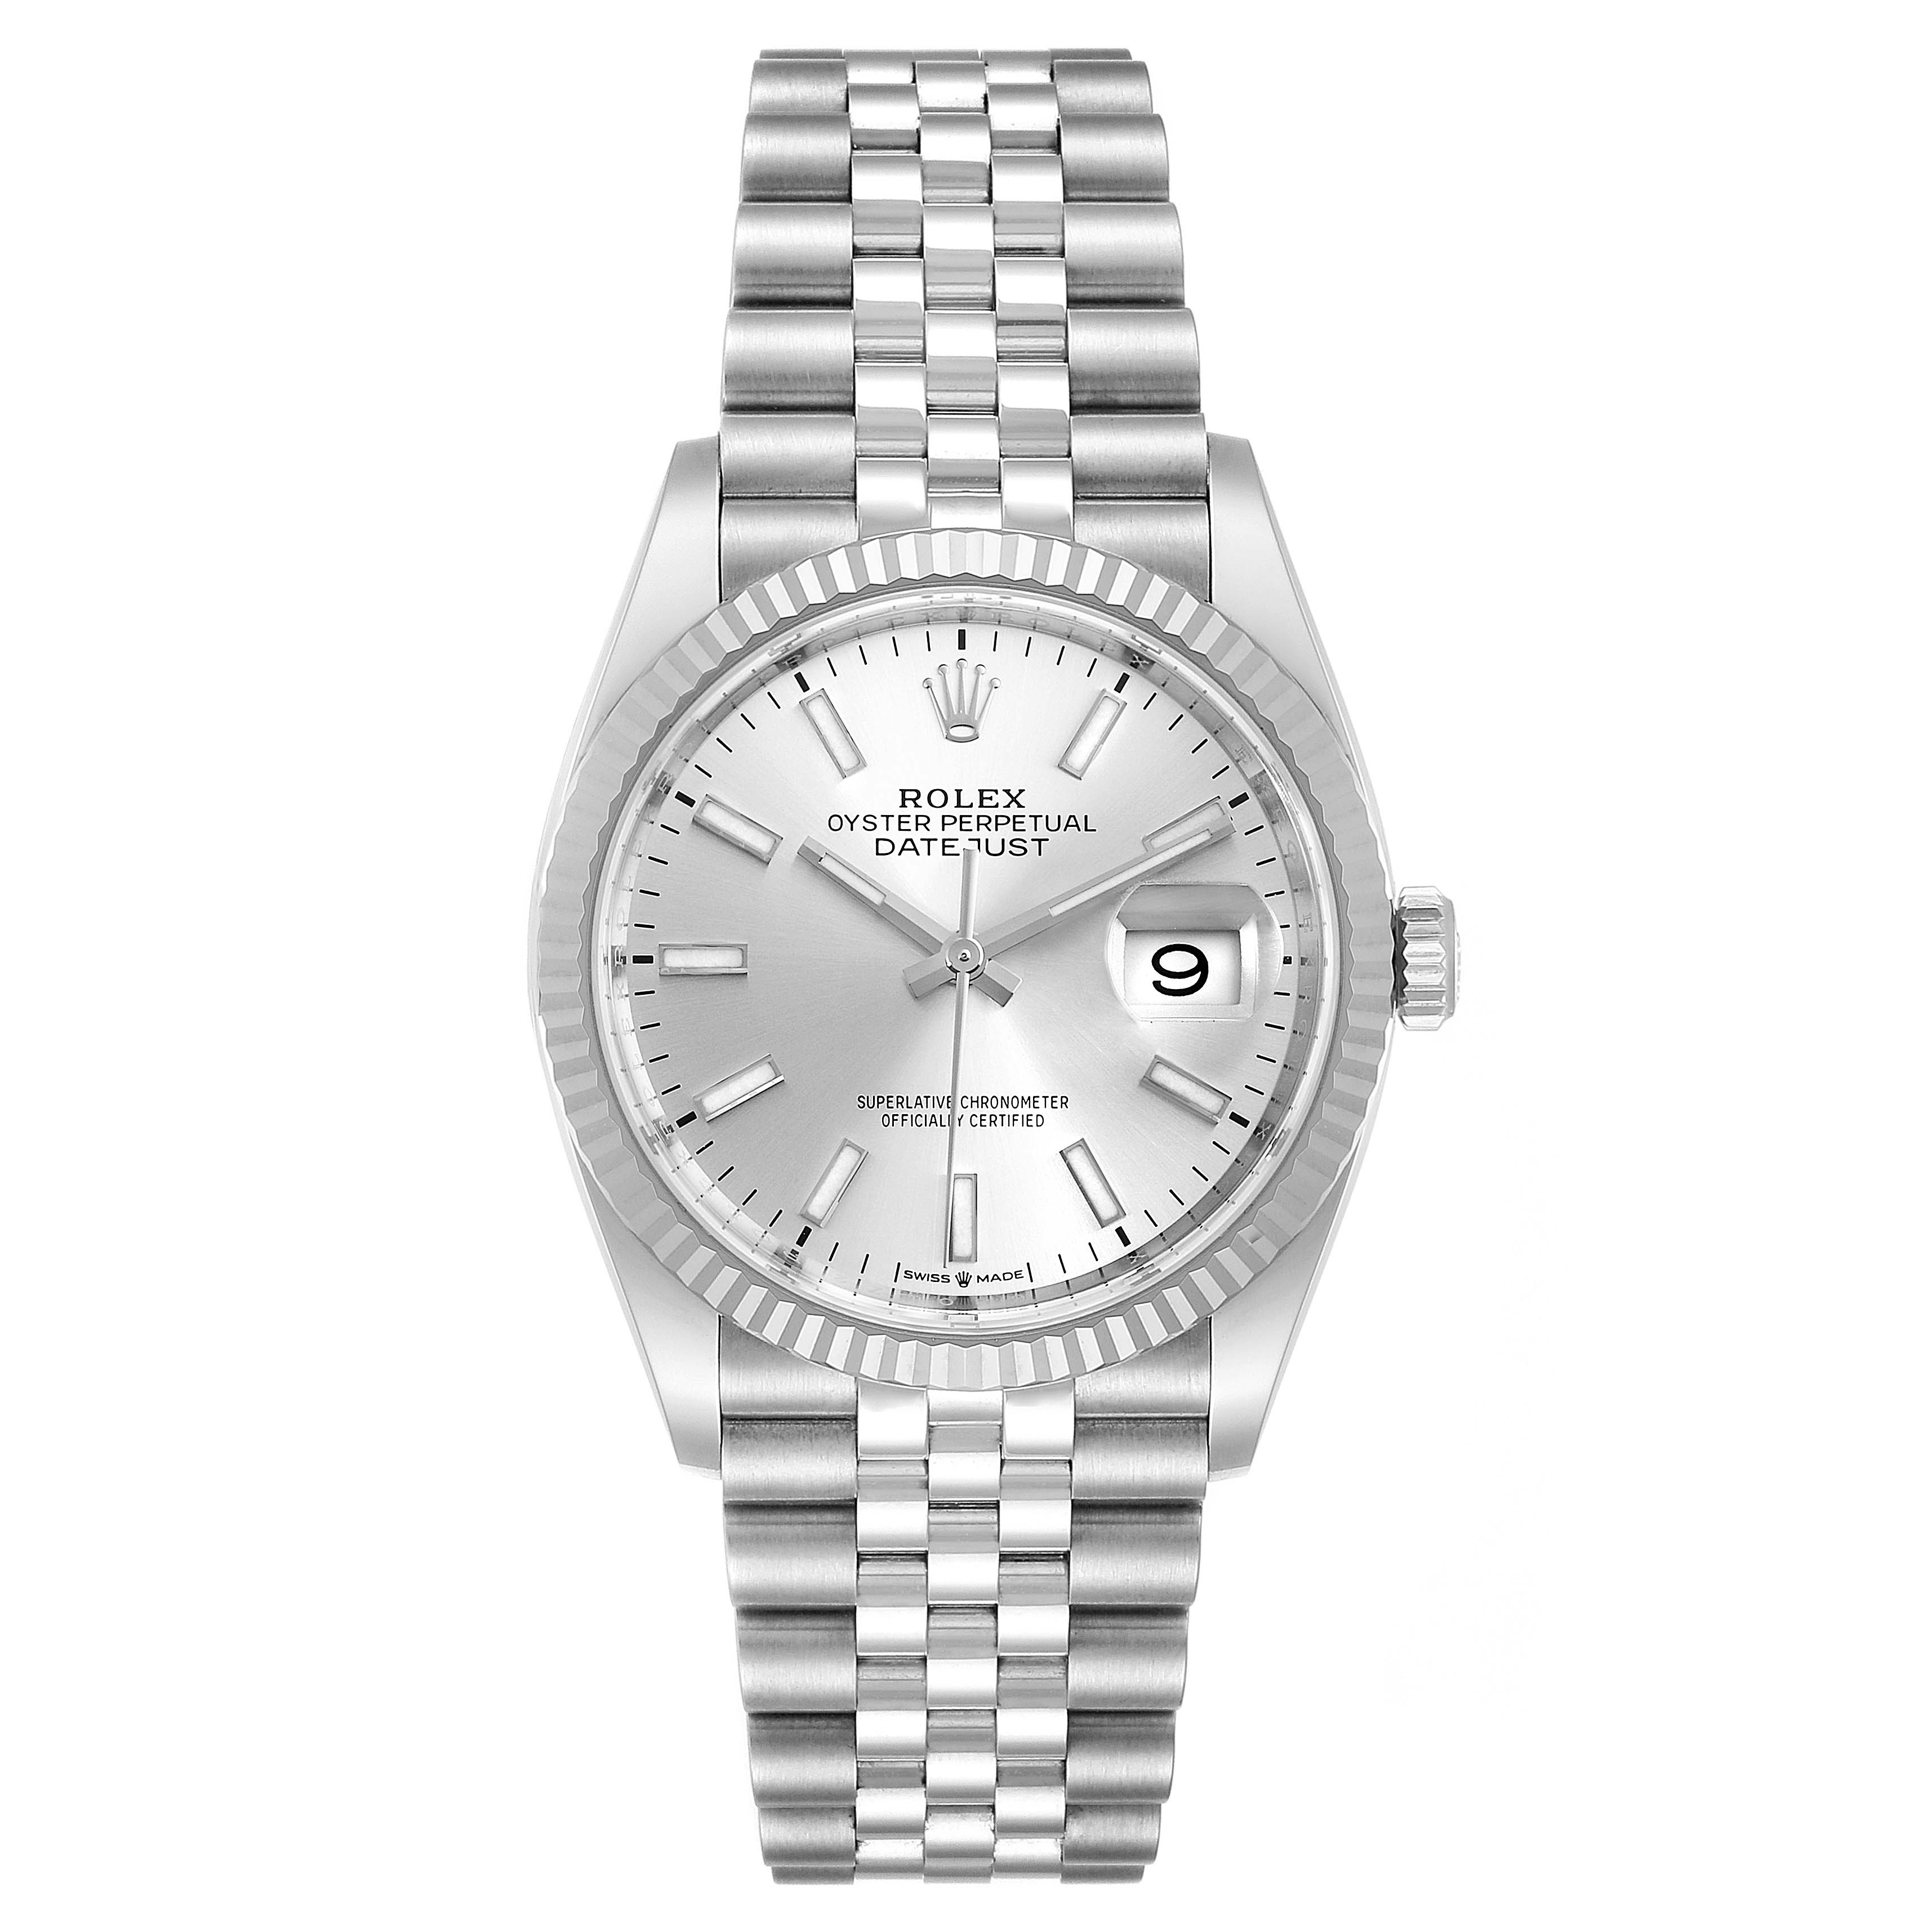 Rolex Datejust Steel White Gold Silver Dial Mens Watch 126234 Box Card ...